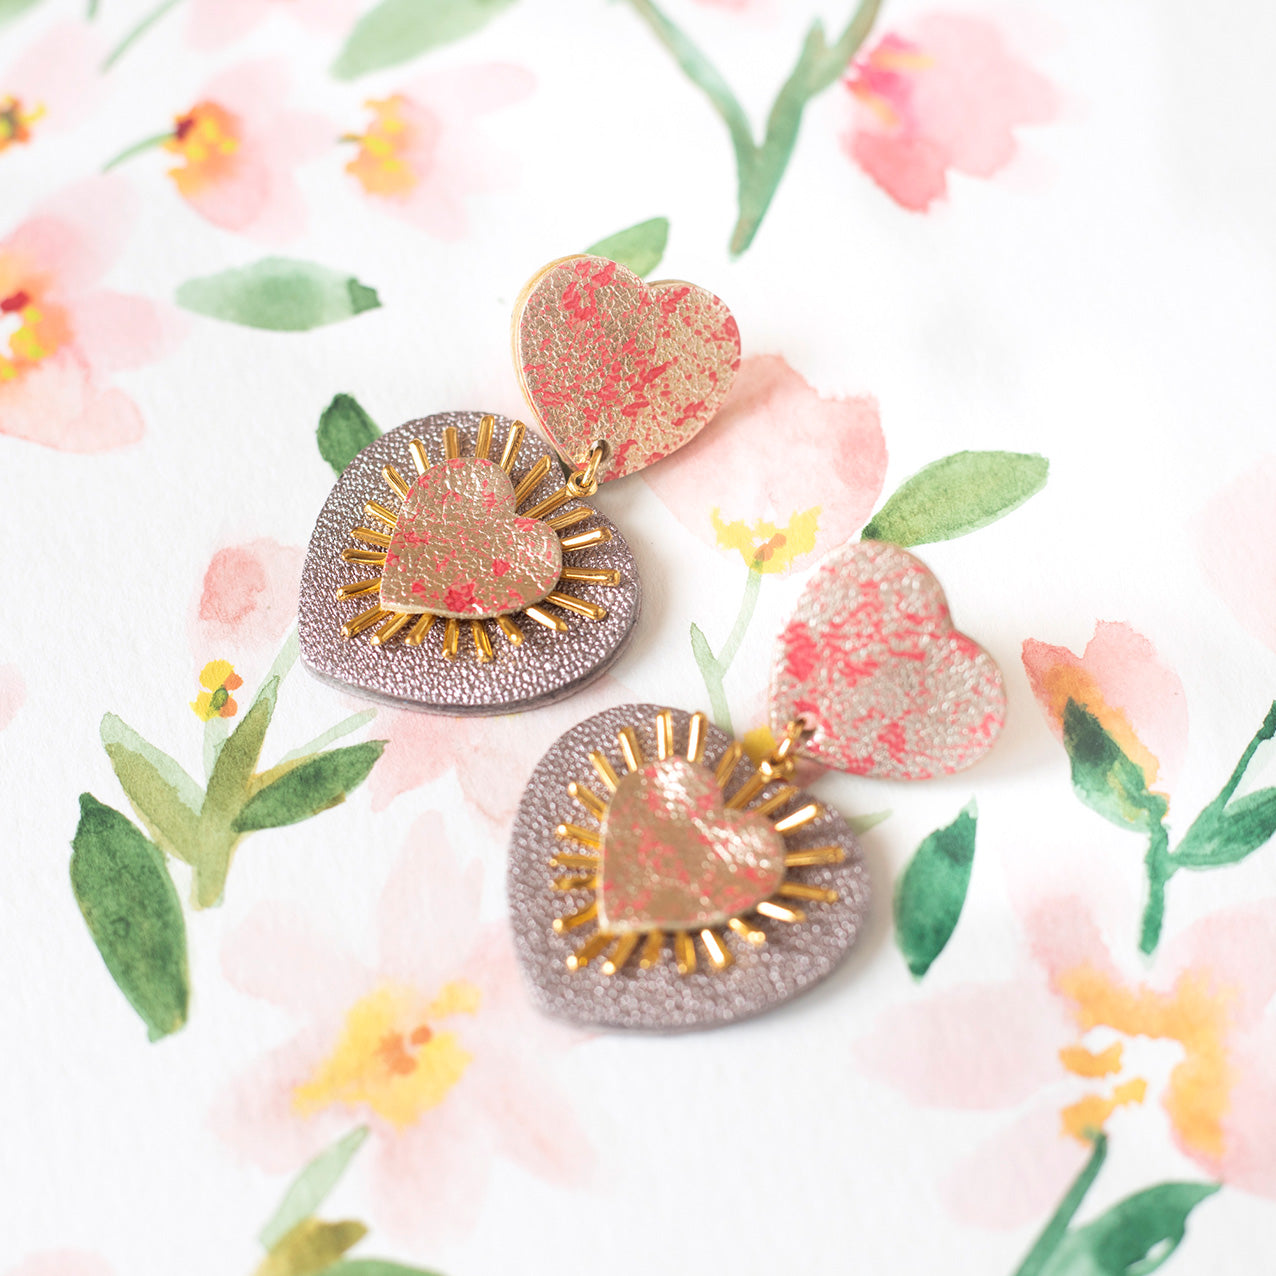 Sacré Coeur earrings in silver gray leather and pink gold coral